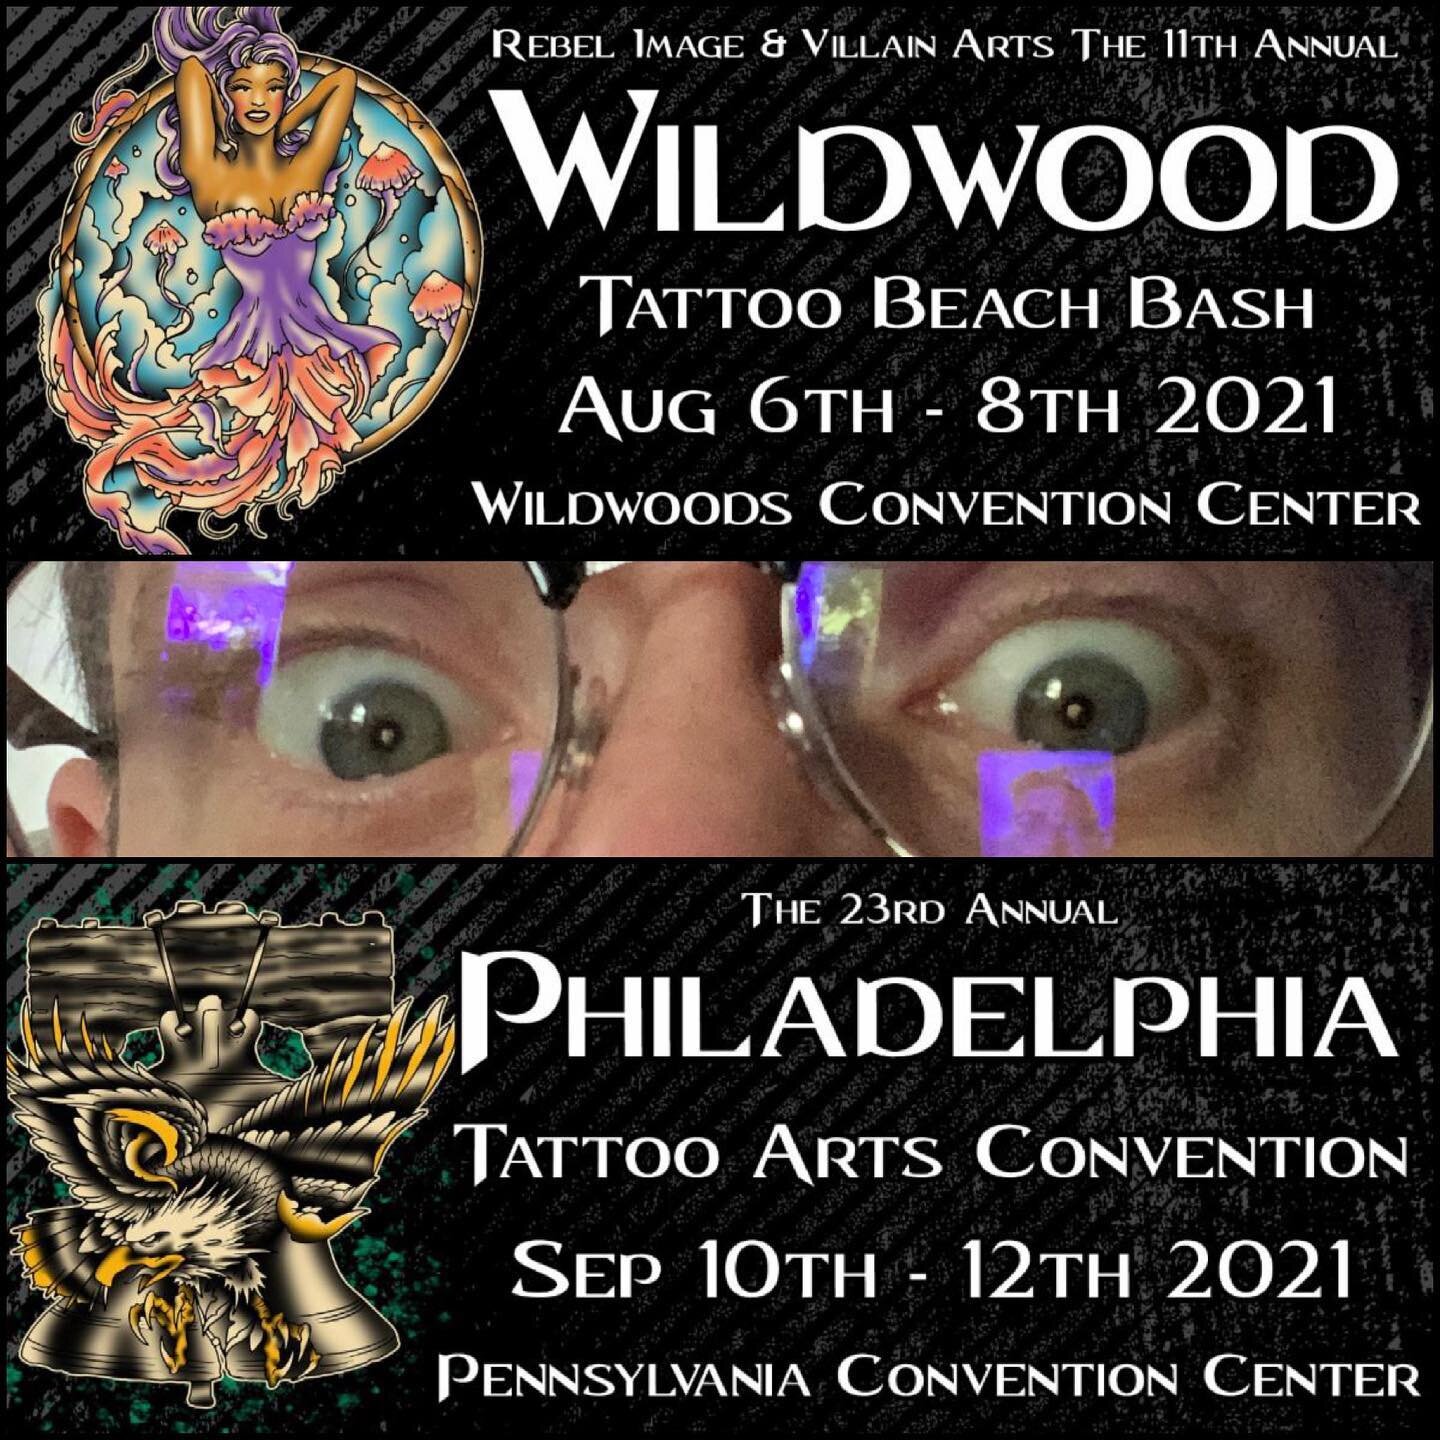 Back at it again! Email doctattoos@hotmail.com  to book for either of these. 😎✌🏻
-
-
-
-
-
-
#villainarts #villainartstattooconvention #wildwood #philadelphia #gobirds #goseagulls #tattooconvention #doctattoos #777tattoostuckerton #ontheroadagain